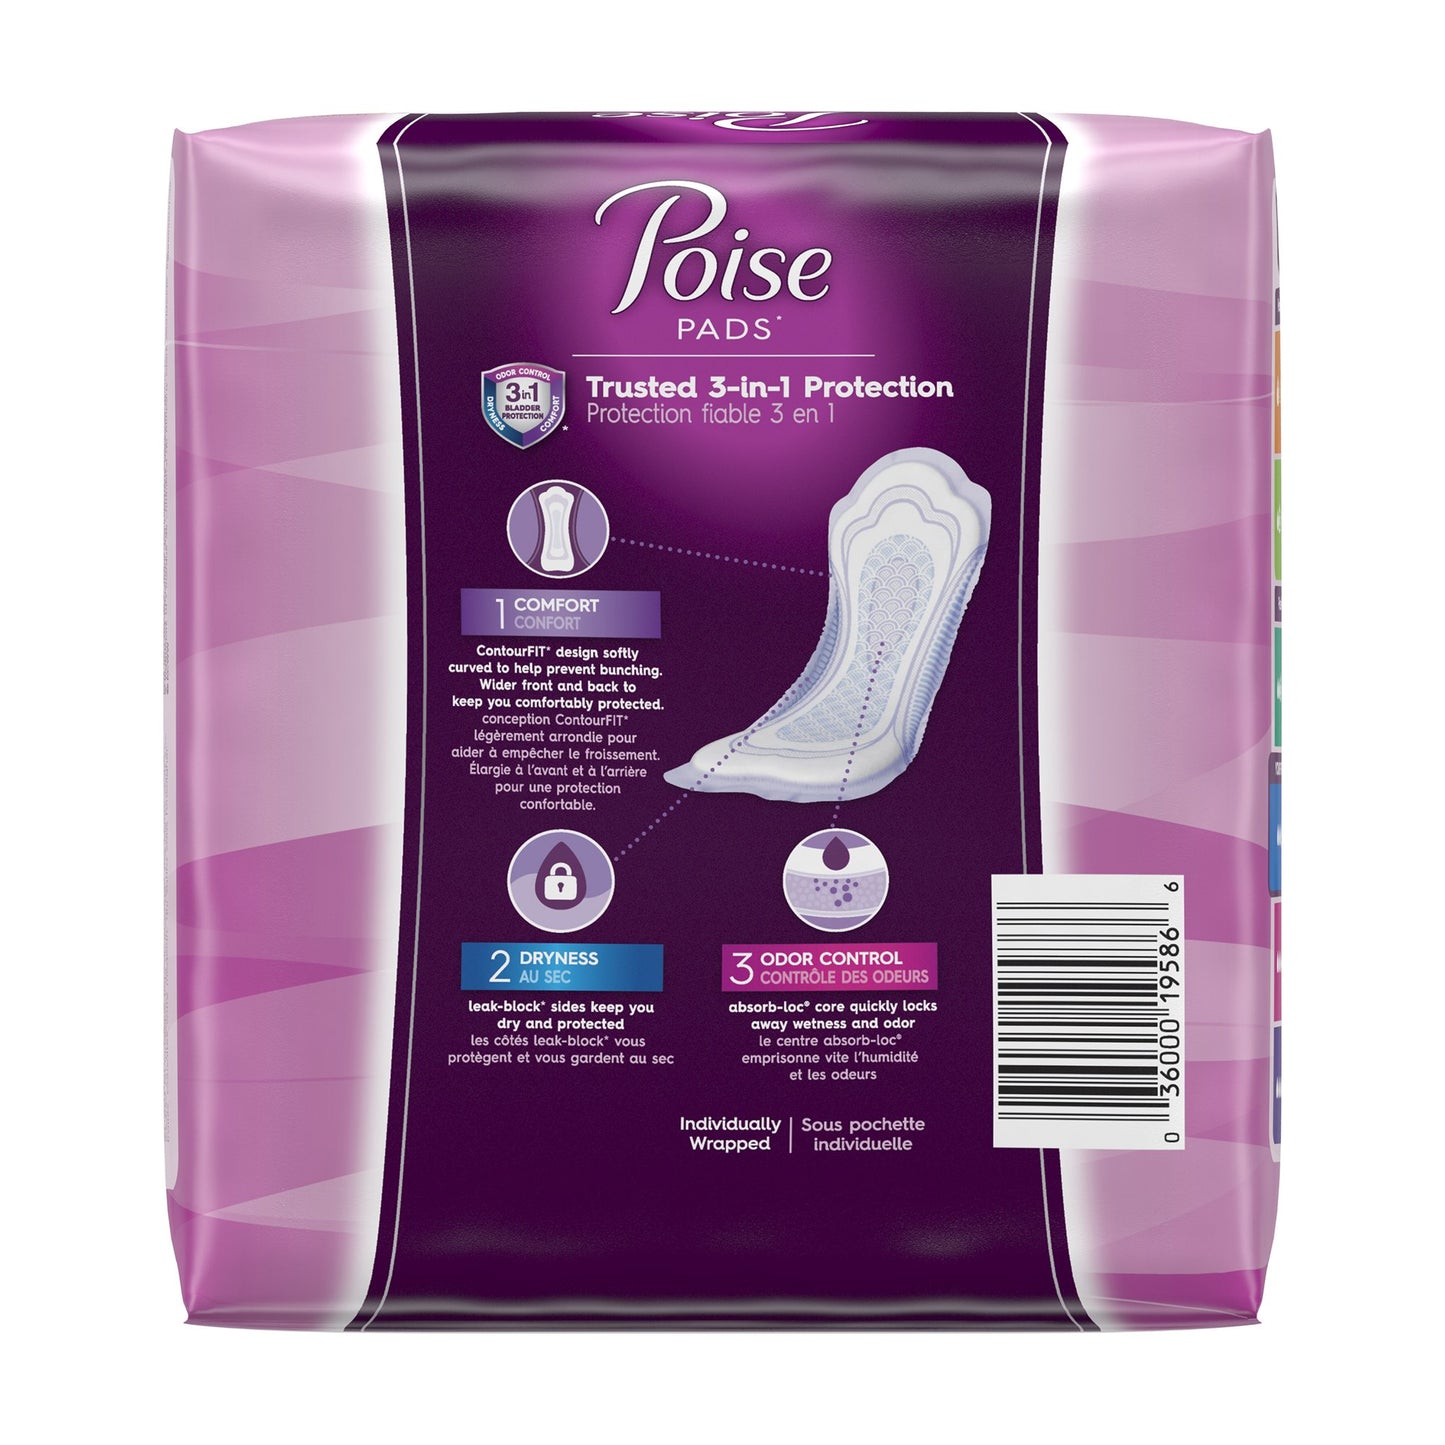 Poise Bladder Control Pads, Adult Women, Disposable, 20 ct